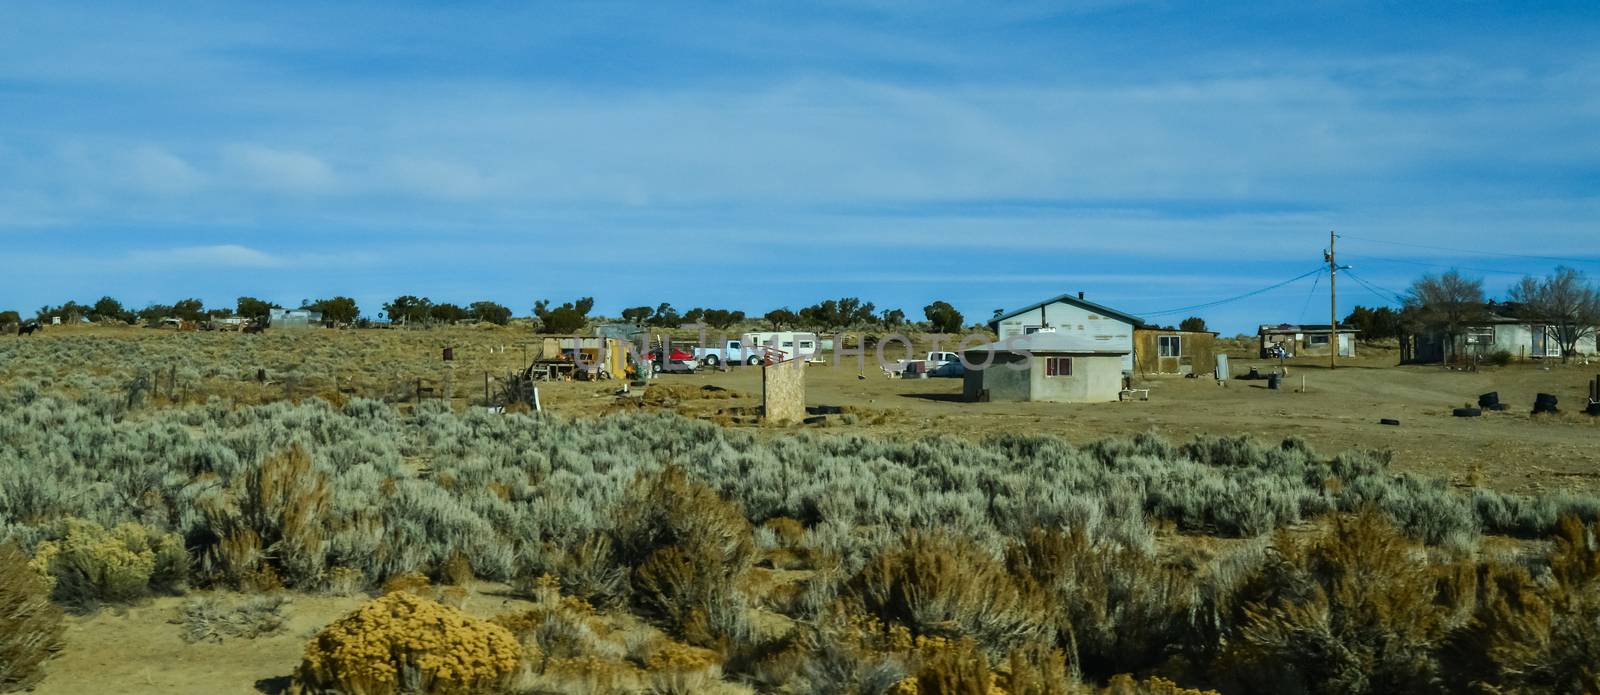 Typical Native American Reservation Homes in New Mexico, USA by Hydrobiolog